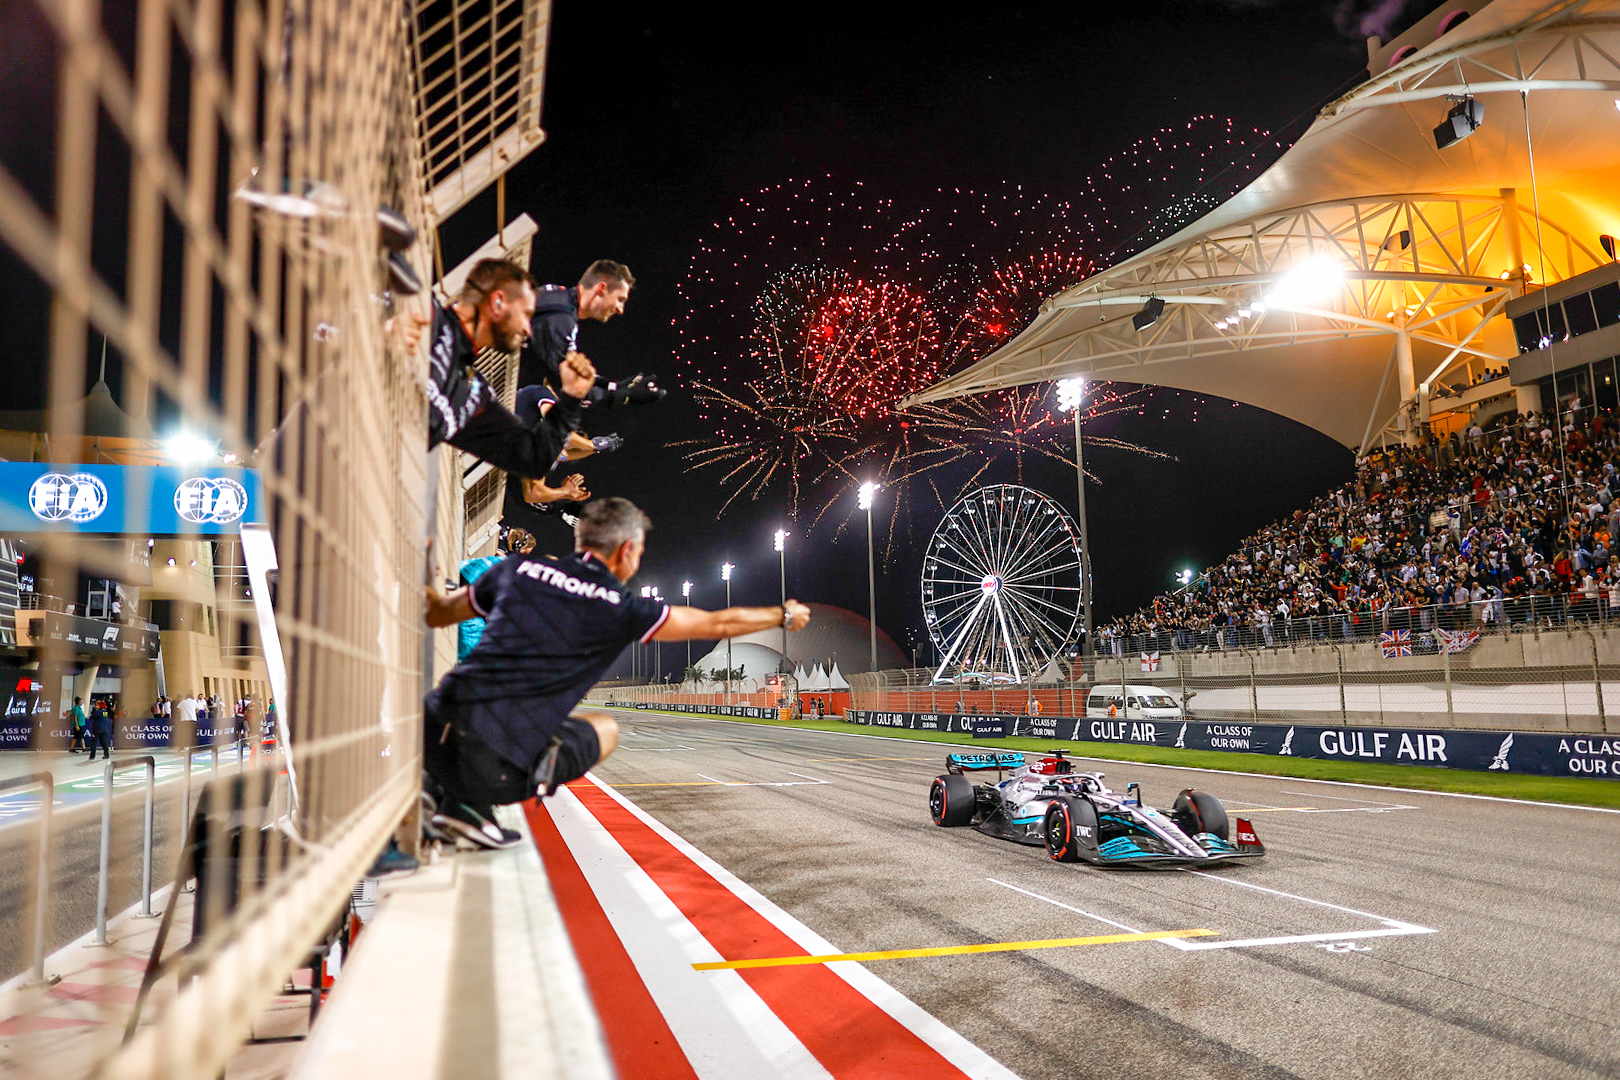 A solid P3 and P4 for the Mercedes-AMG Petronas F1 Team at the Bahrain Grand Prix